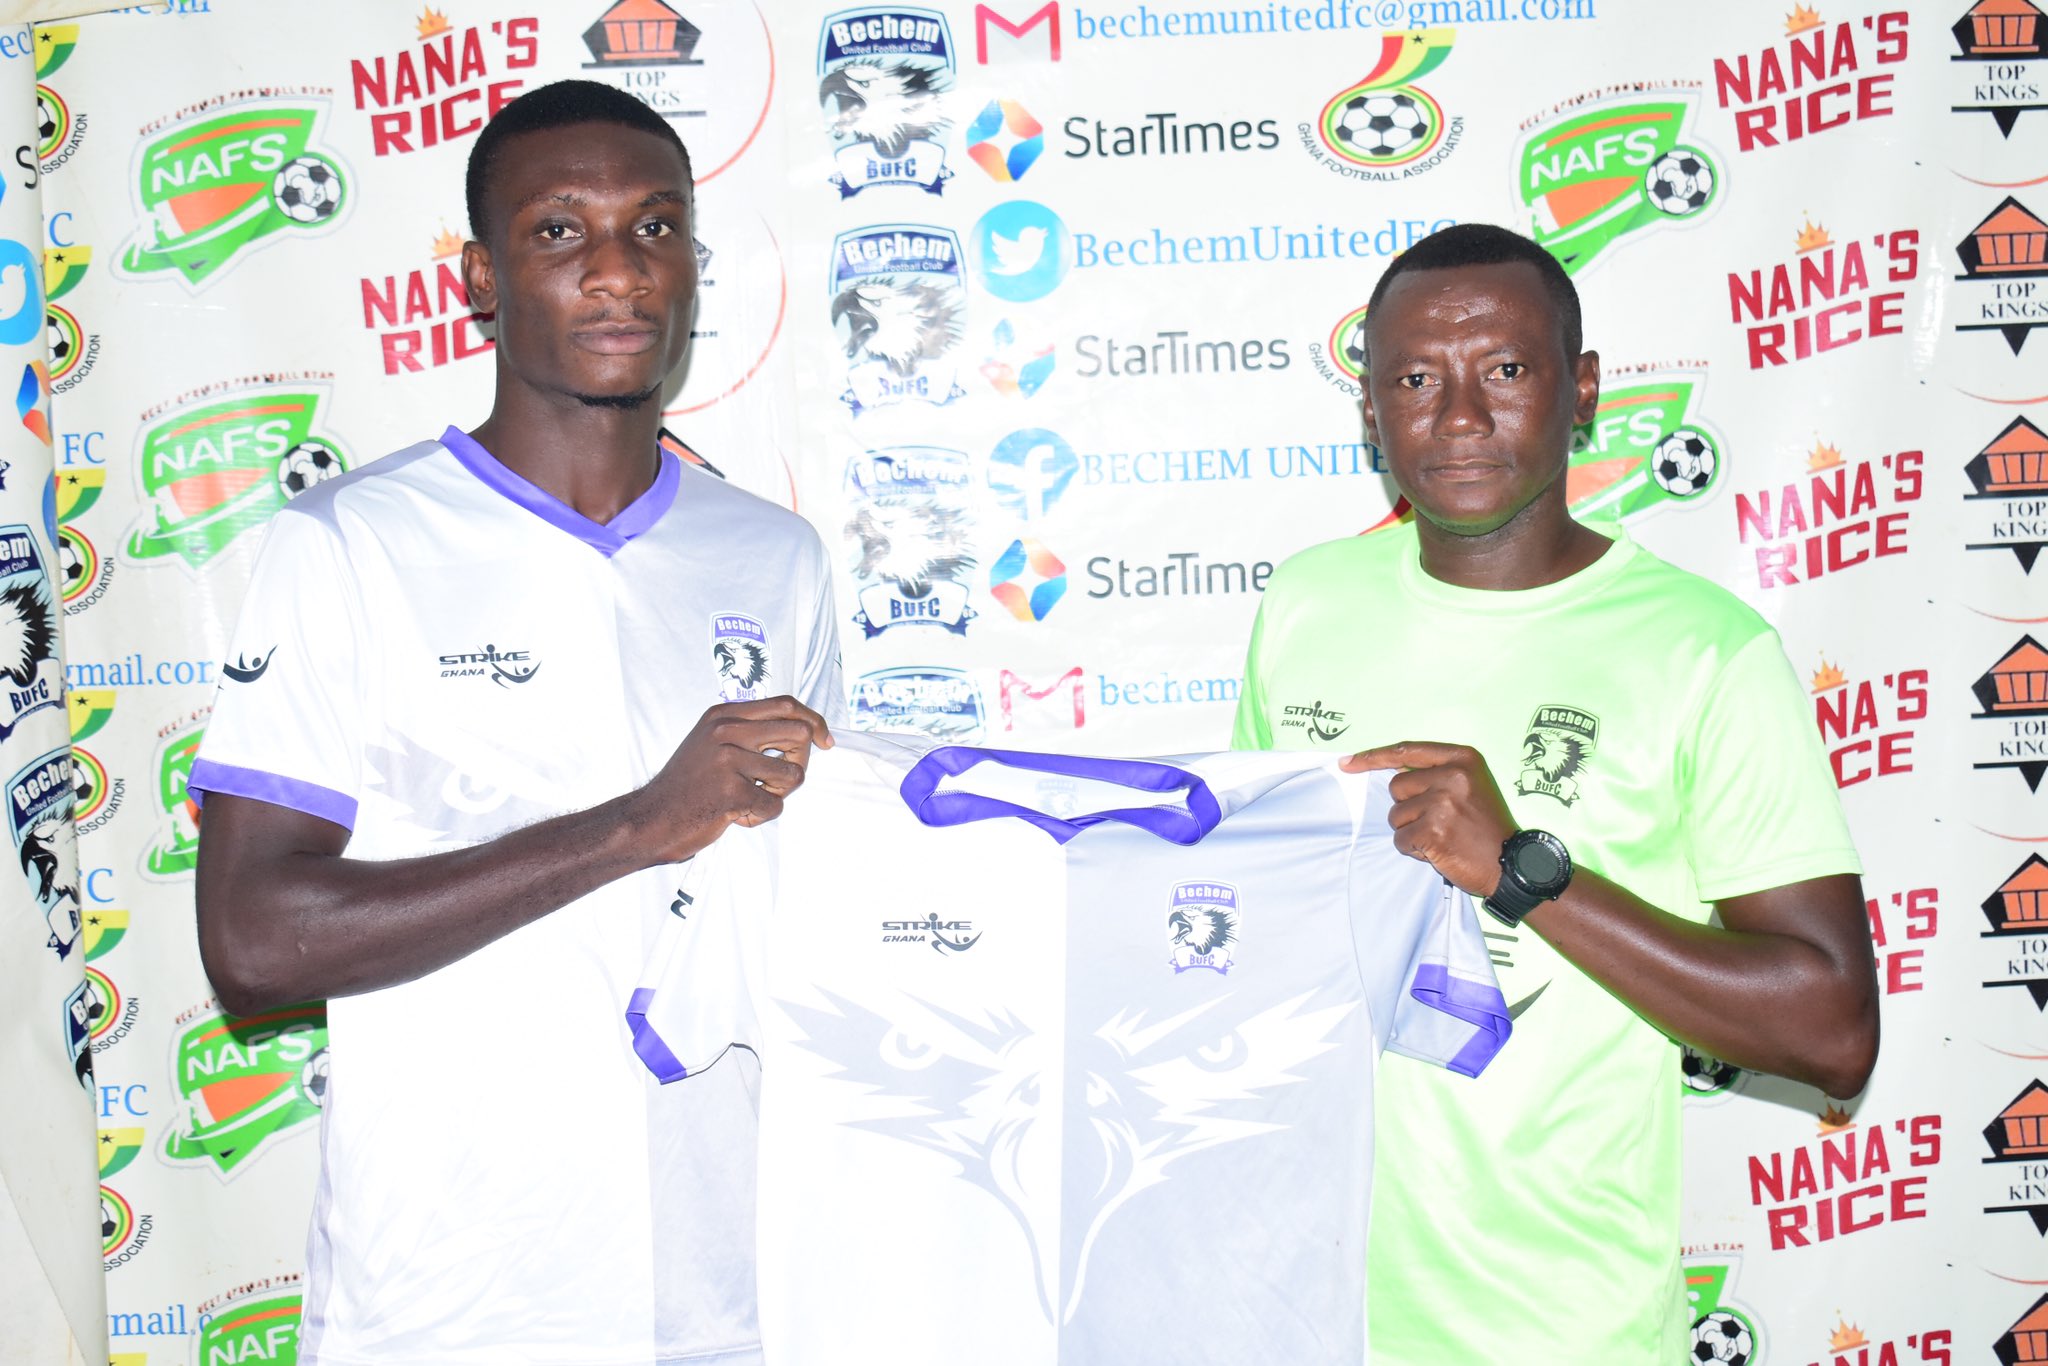 Bechem United announce the signing of young defender Samuel Osei Kuffour